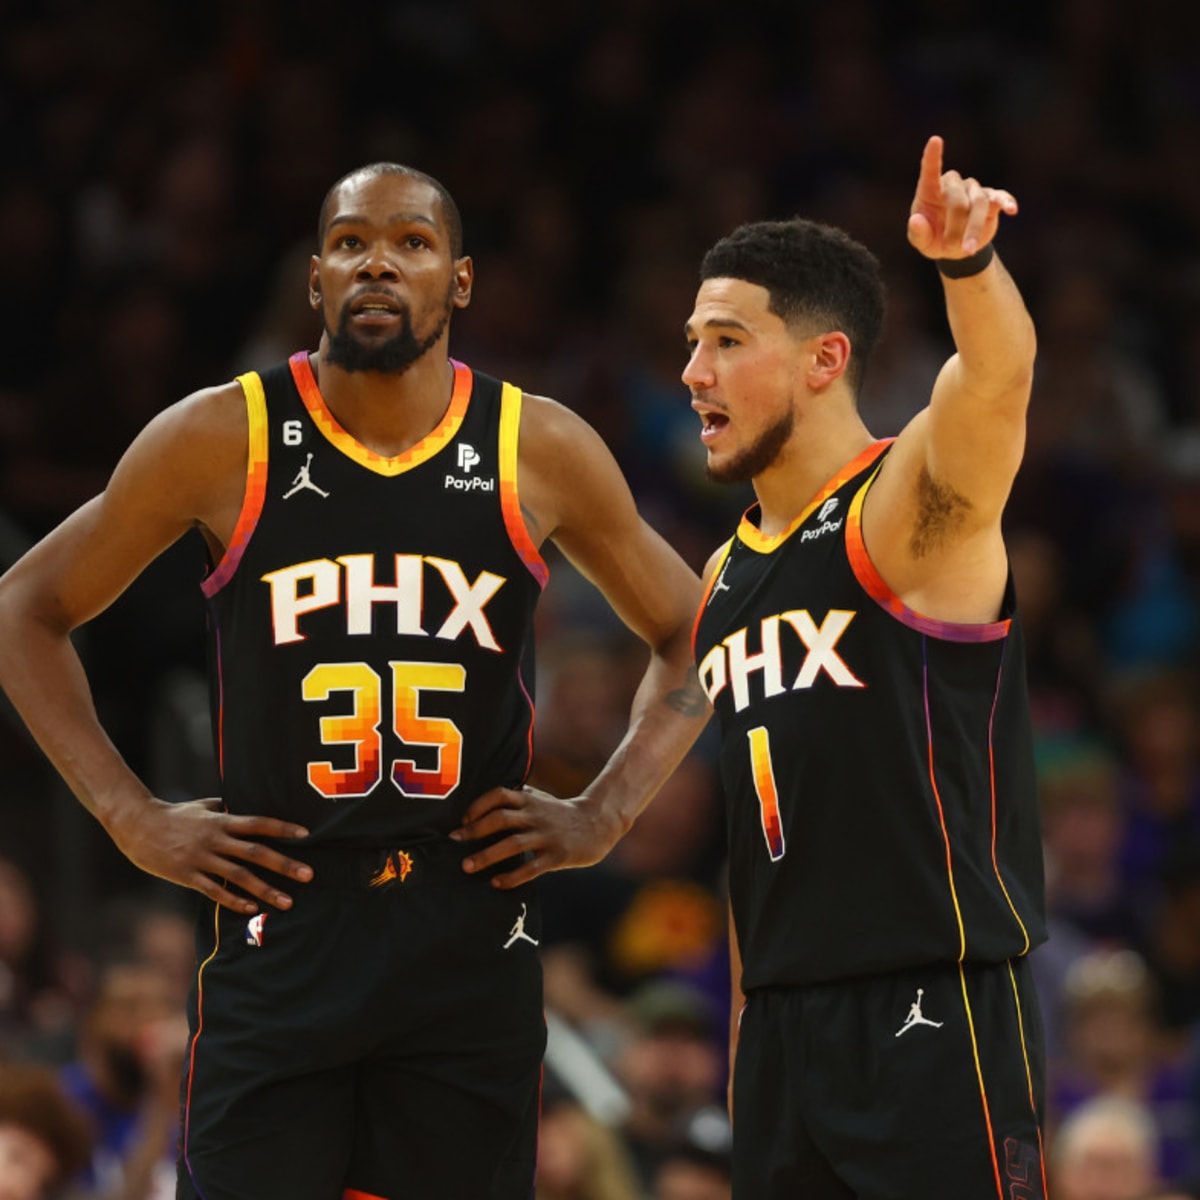 Report: Suns' Kevin Durant, Devin Booker, Chris Paul to Sit vs